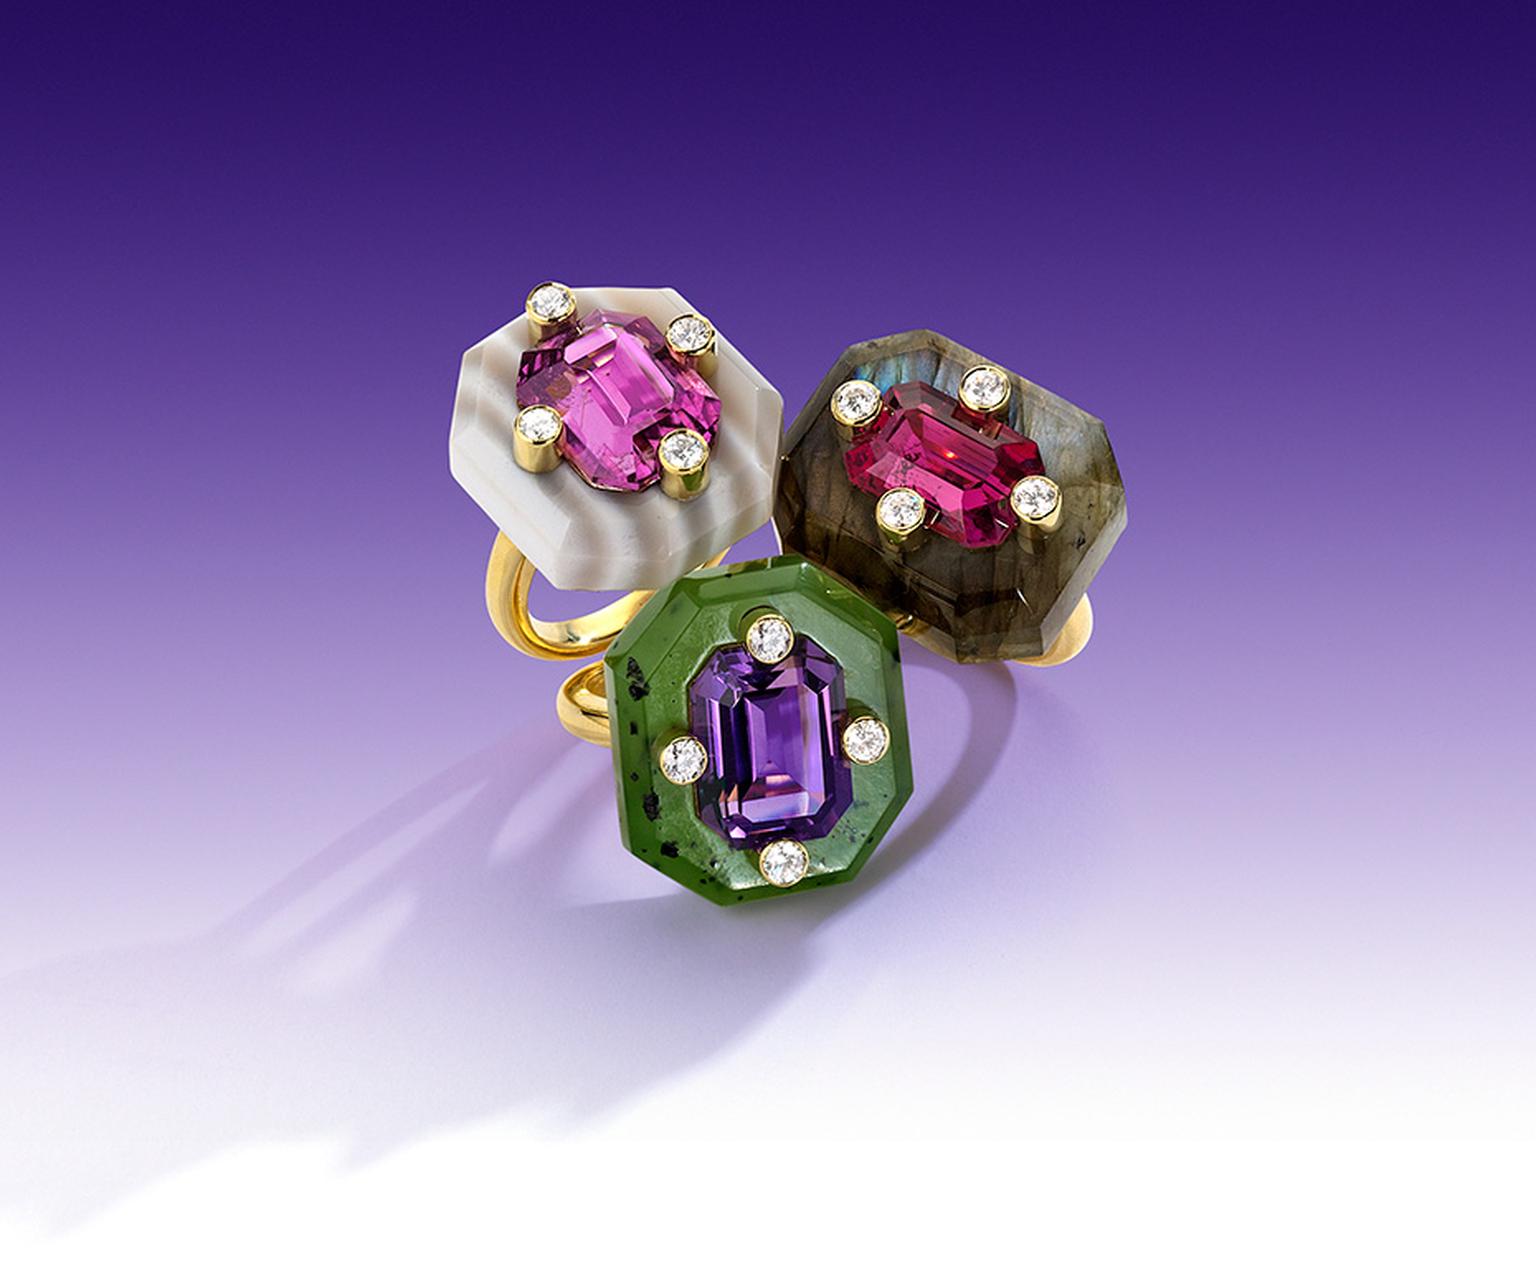 Nicholas Varney 2012 'Duo' gold rings featuring carved labradorite, pink tourmaline and diamond horizontal; carved nephrite jade, amethyst and diamond; and carved striped agate, California pink tourmaline and diamond.